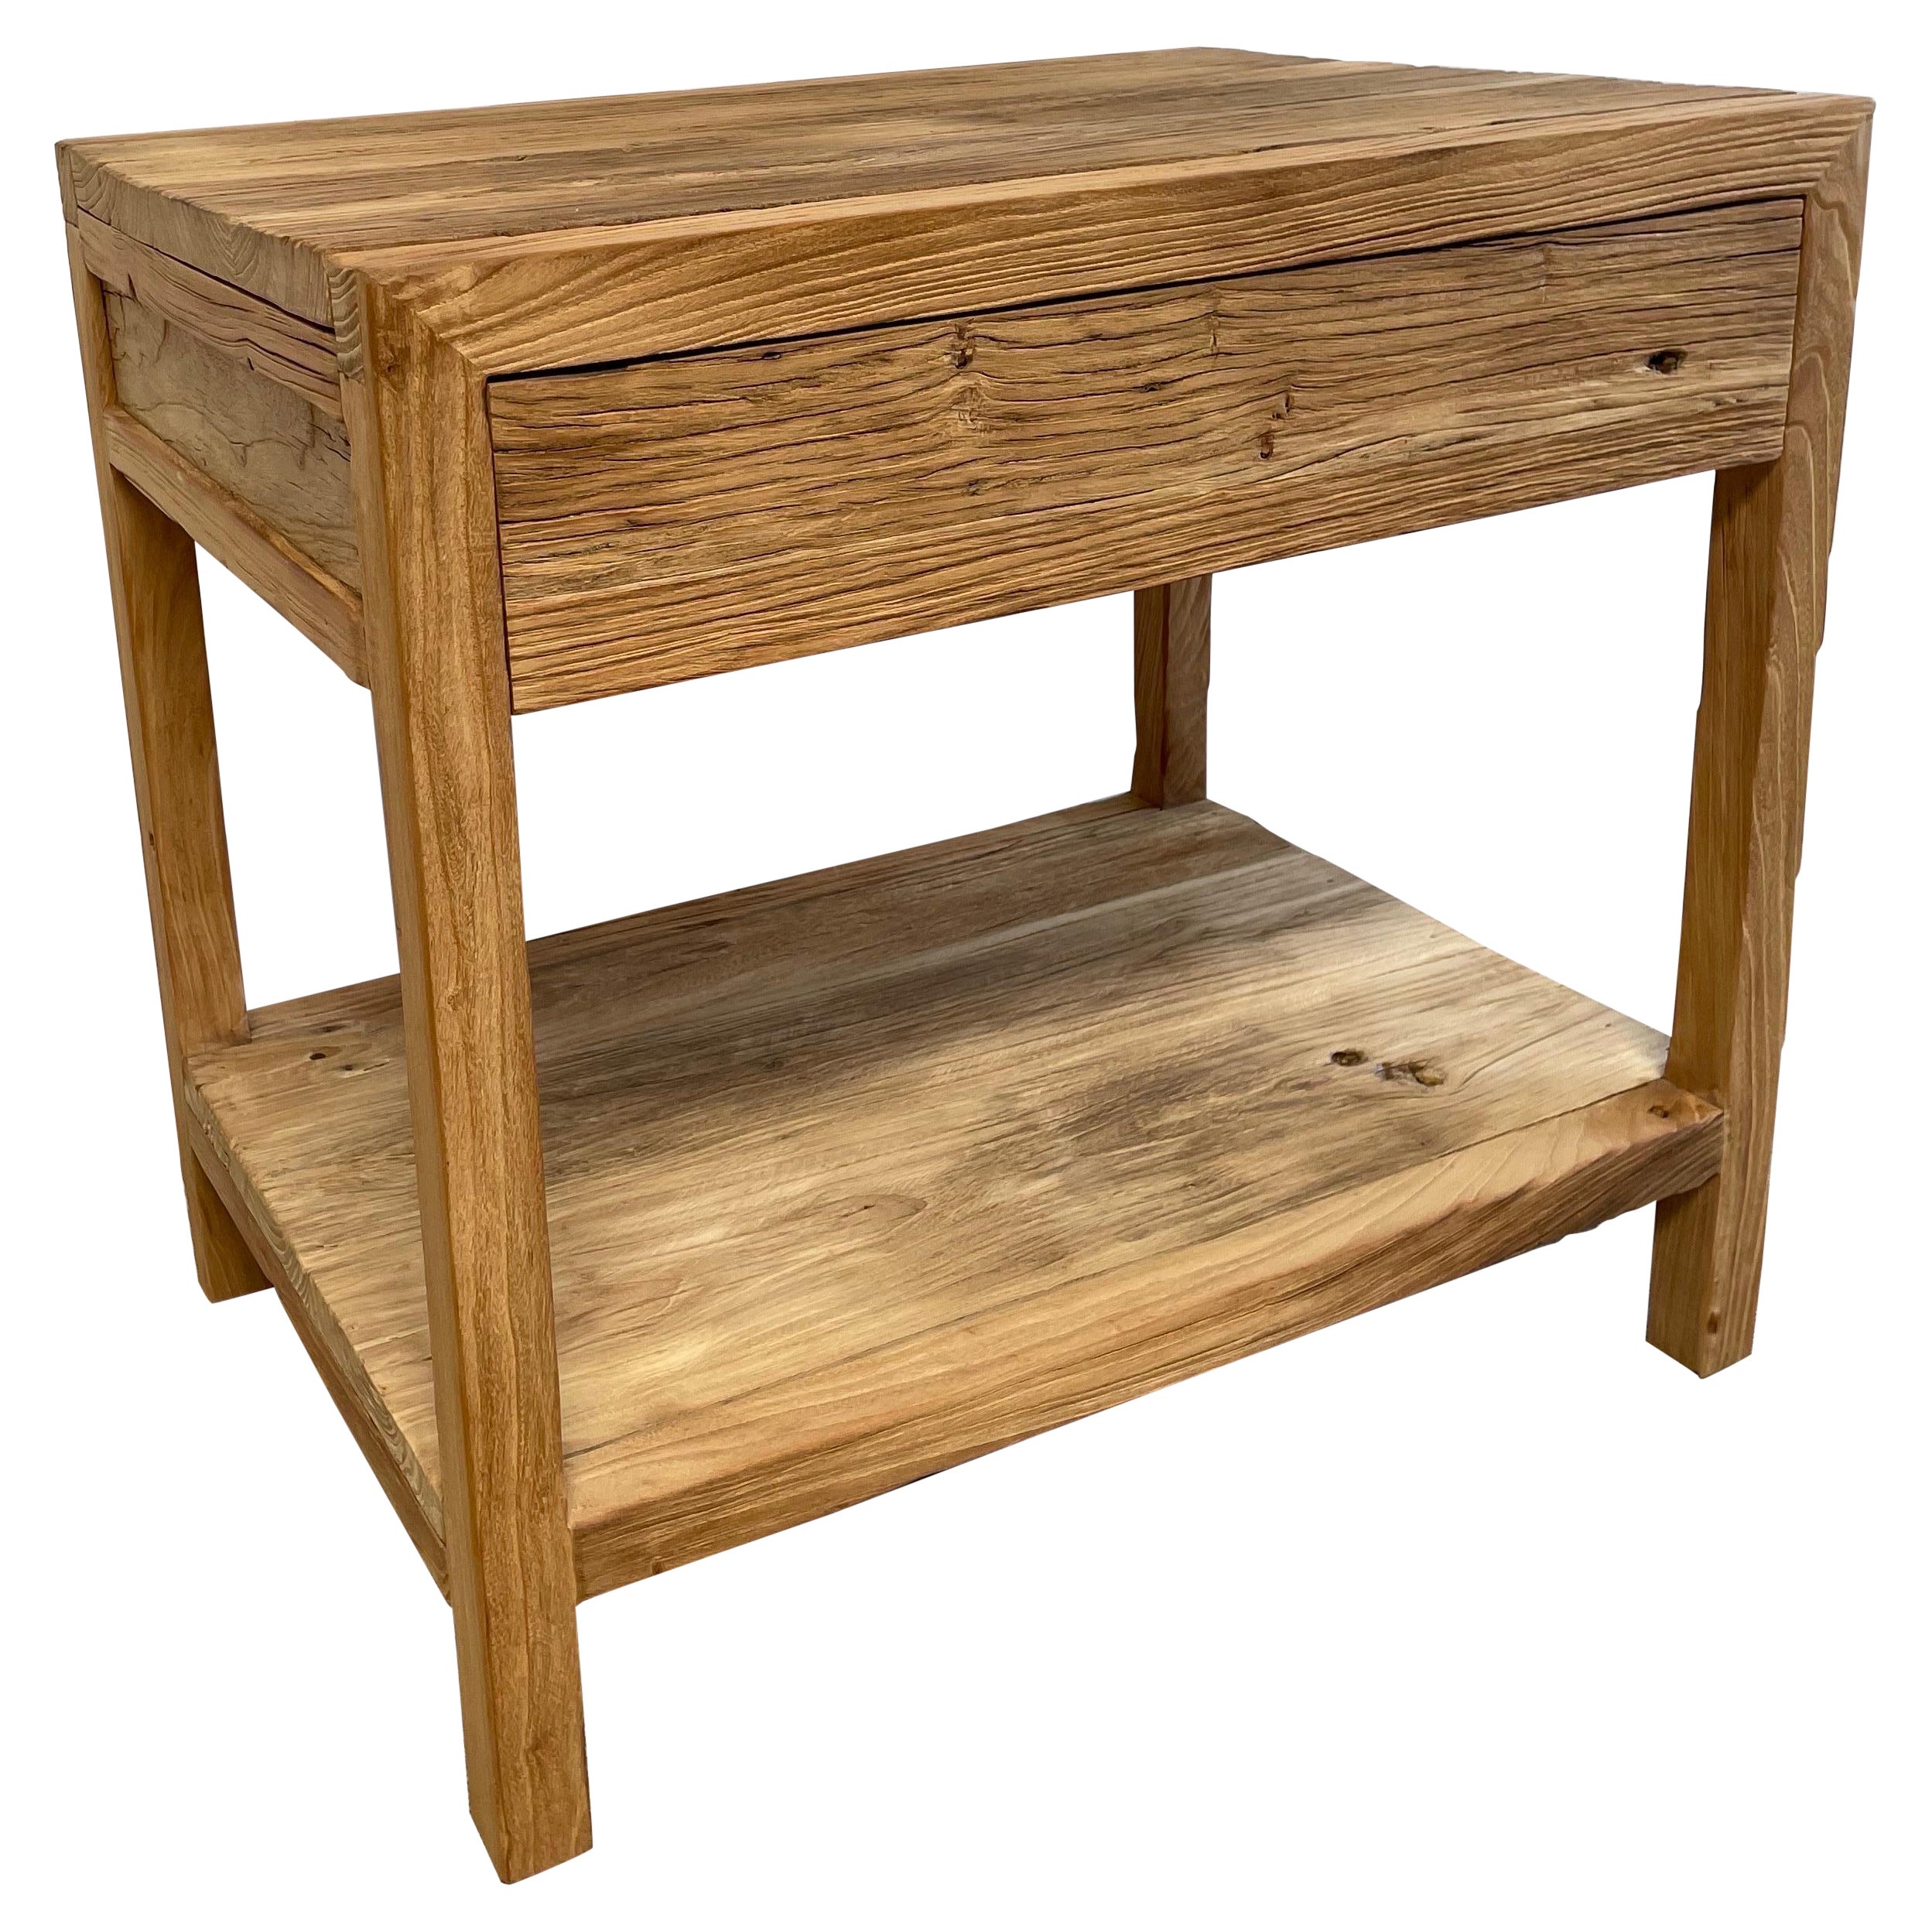 Custom Elm Wood Single Drawer Night Stands Natural Finish For Sale